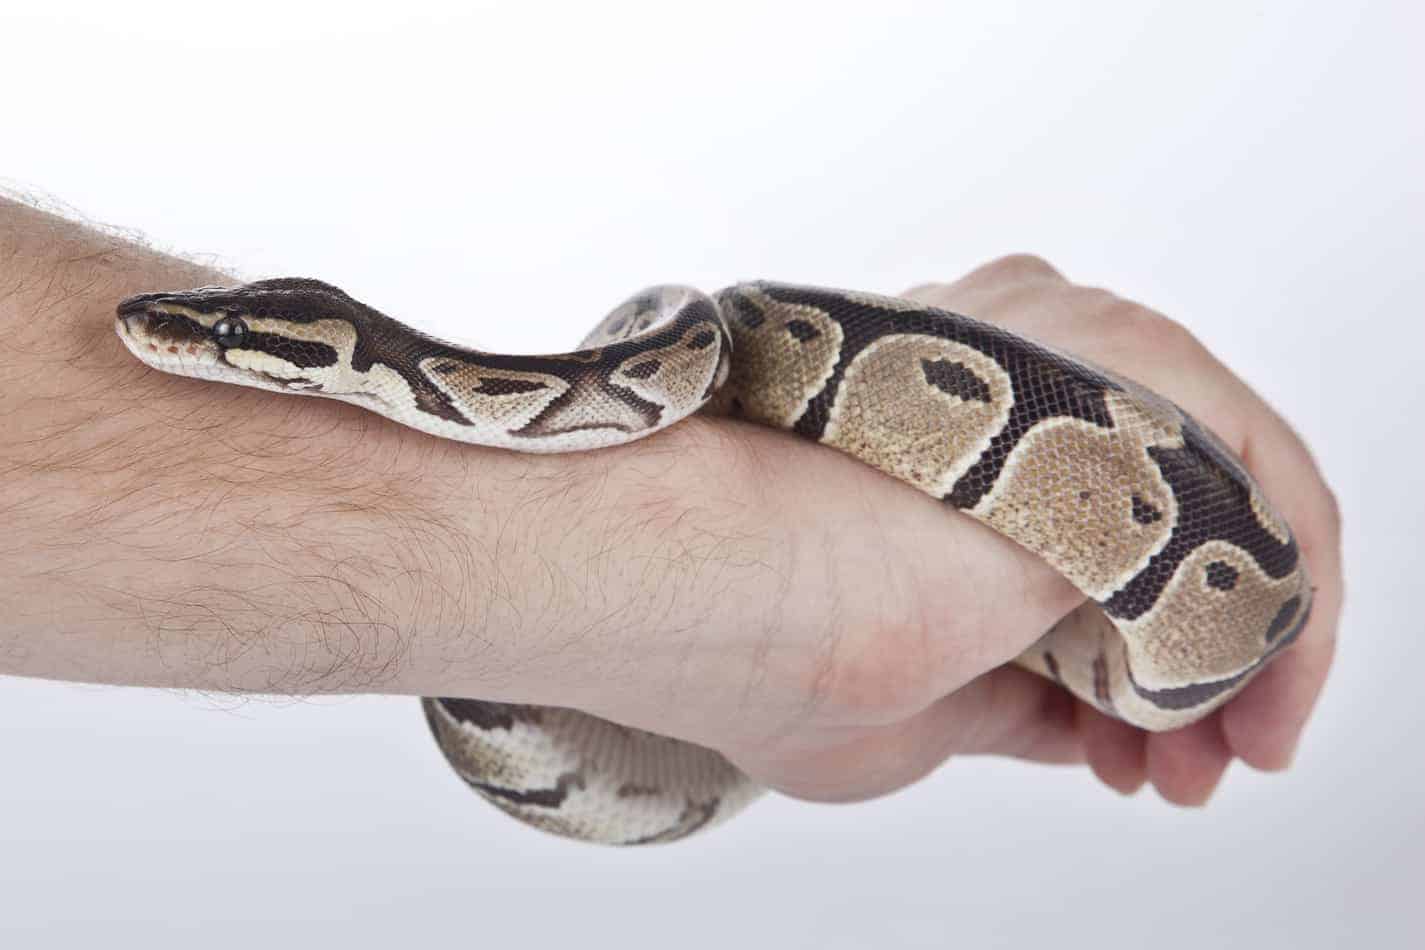 2 How to Choose Your First Pet Snake (Including Pictures and Costs)